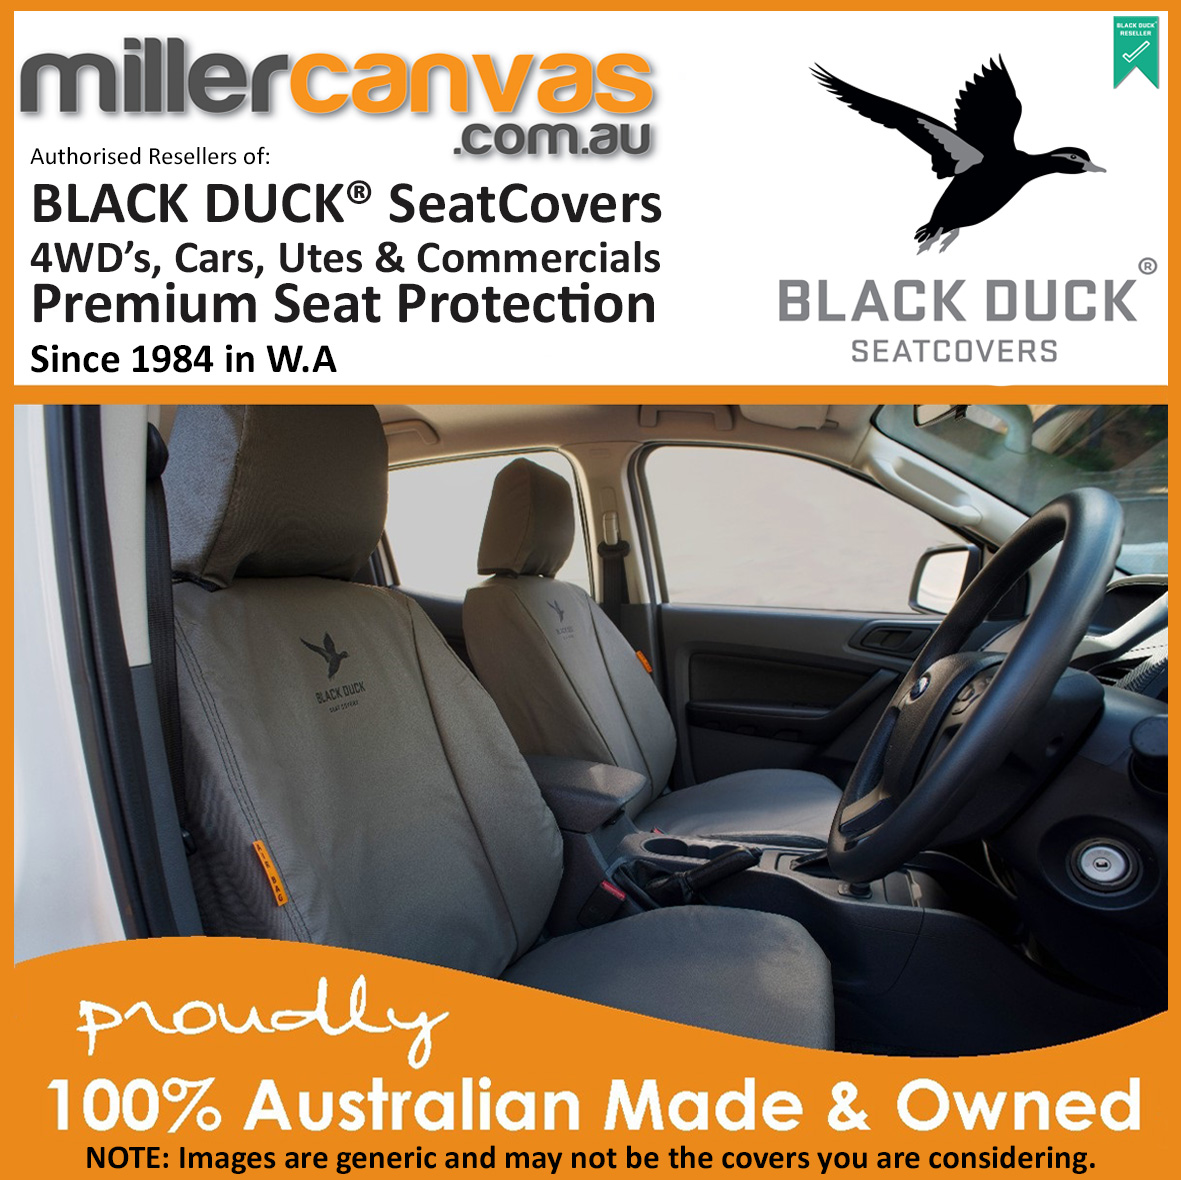 Rear Bench Full Width. Chrysler Jeep Wrangler TJ Series. 08/1996 - 09/2002  Black Duck™ Canvas Seat Covers.